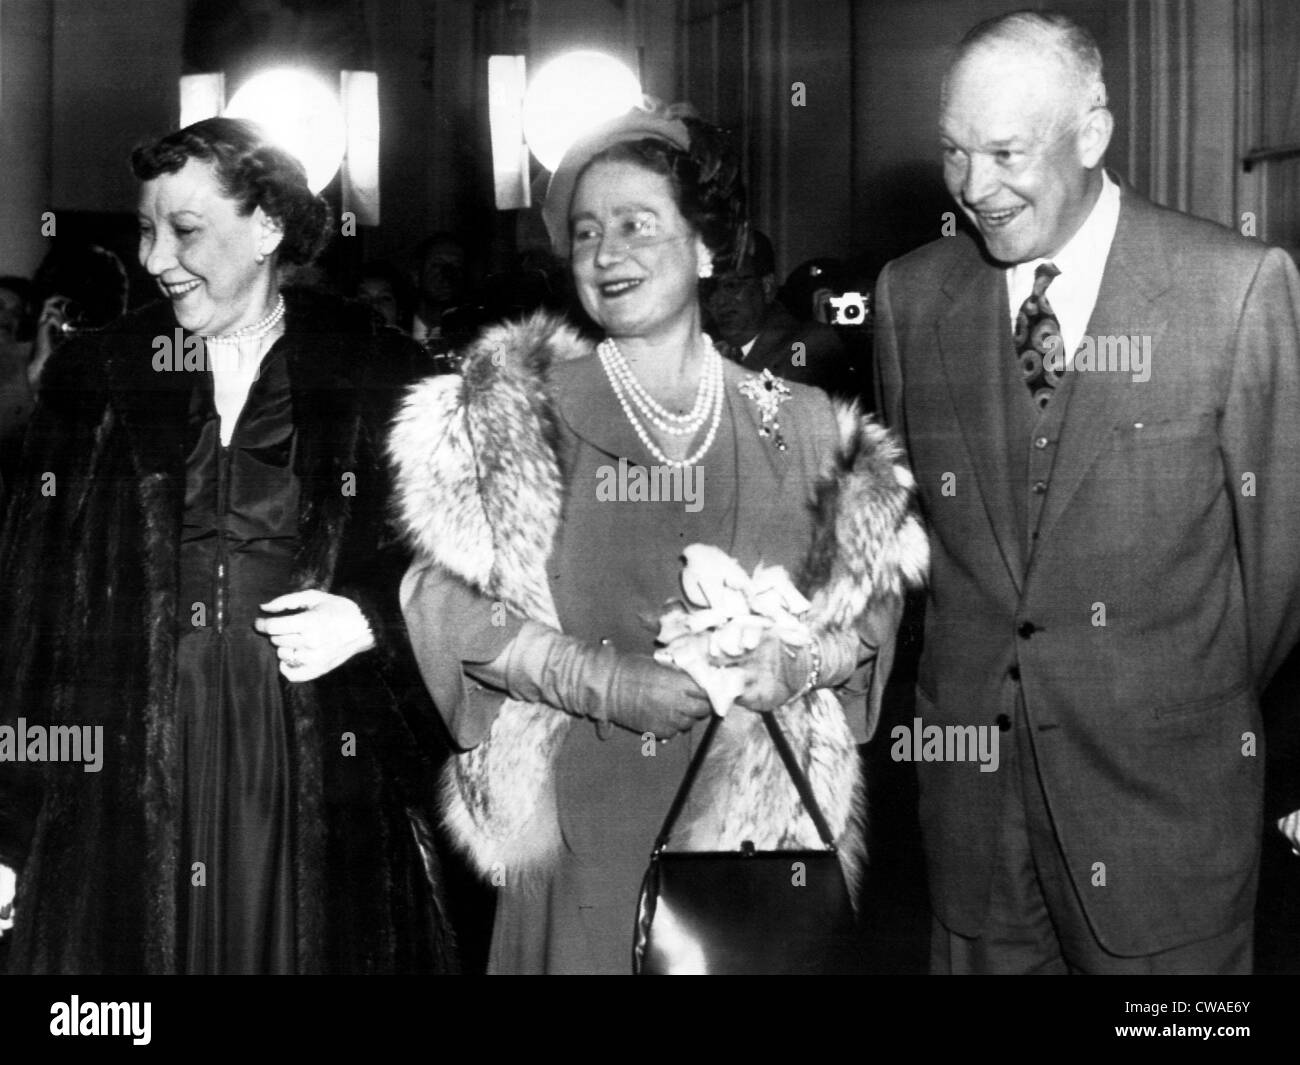 Mamie Eisenhower, Queen Mother Elizabeth, and President Dwight D. Eisenhower on the steps of the White House after a royal Stock Photo